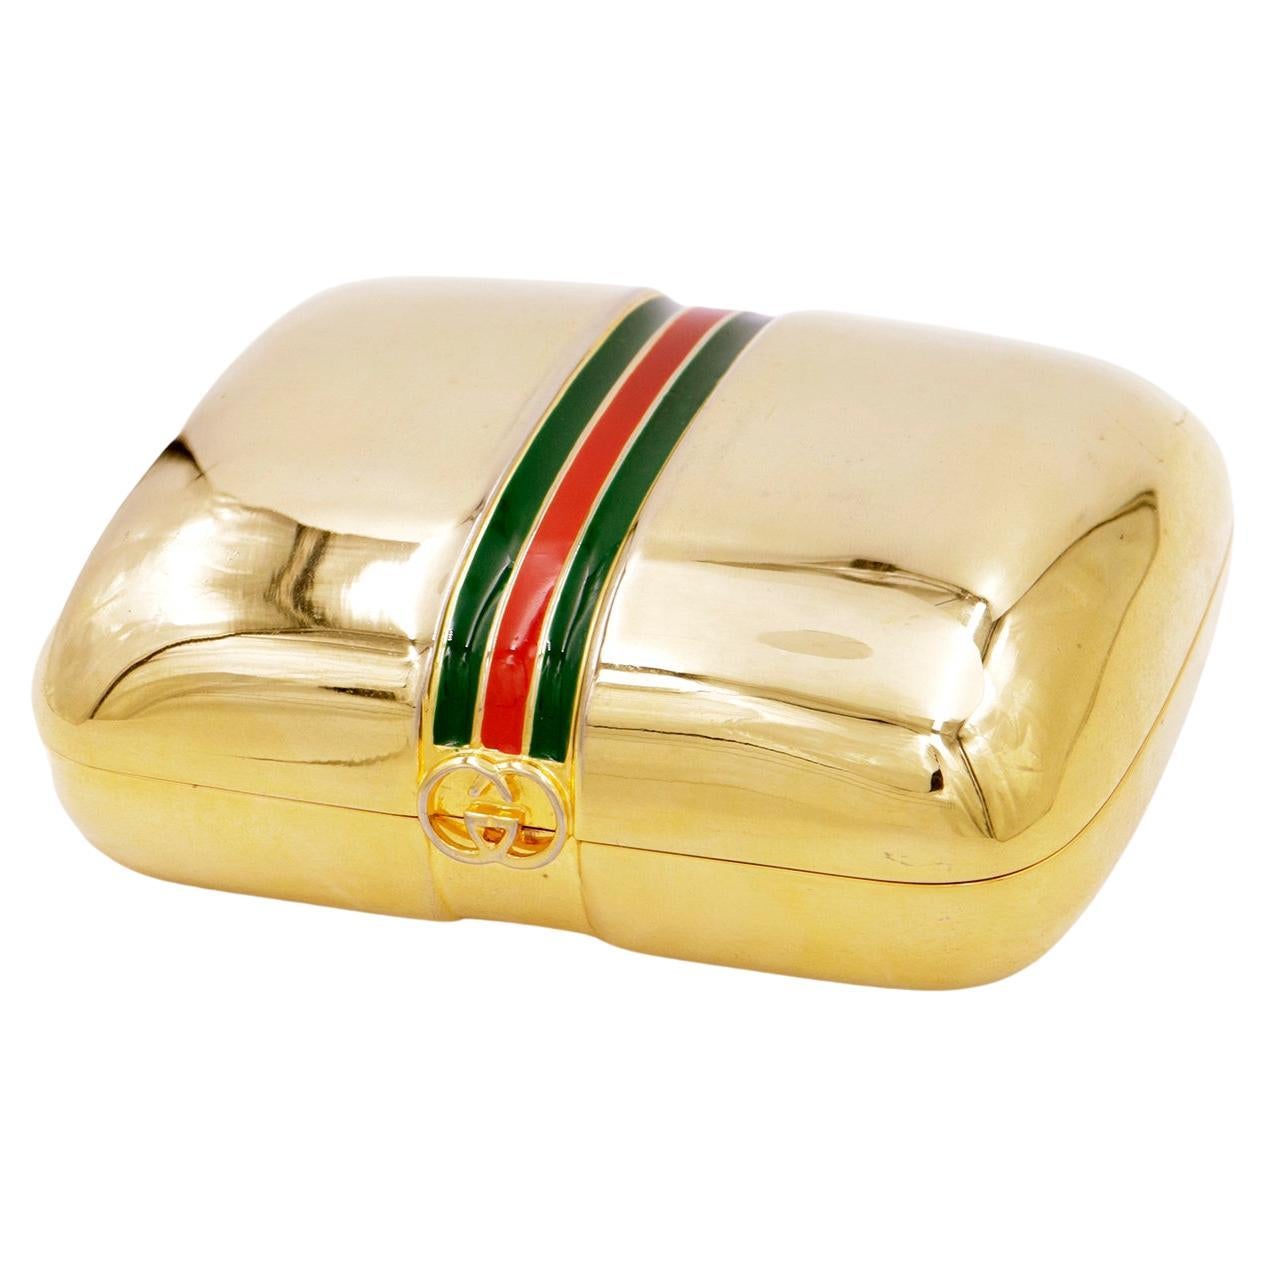 Vintage Gucci Gold Plated Trinket Case With Red & Green Stripe For Sale